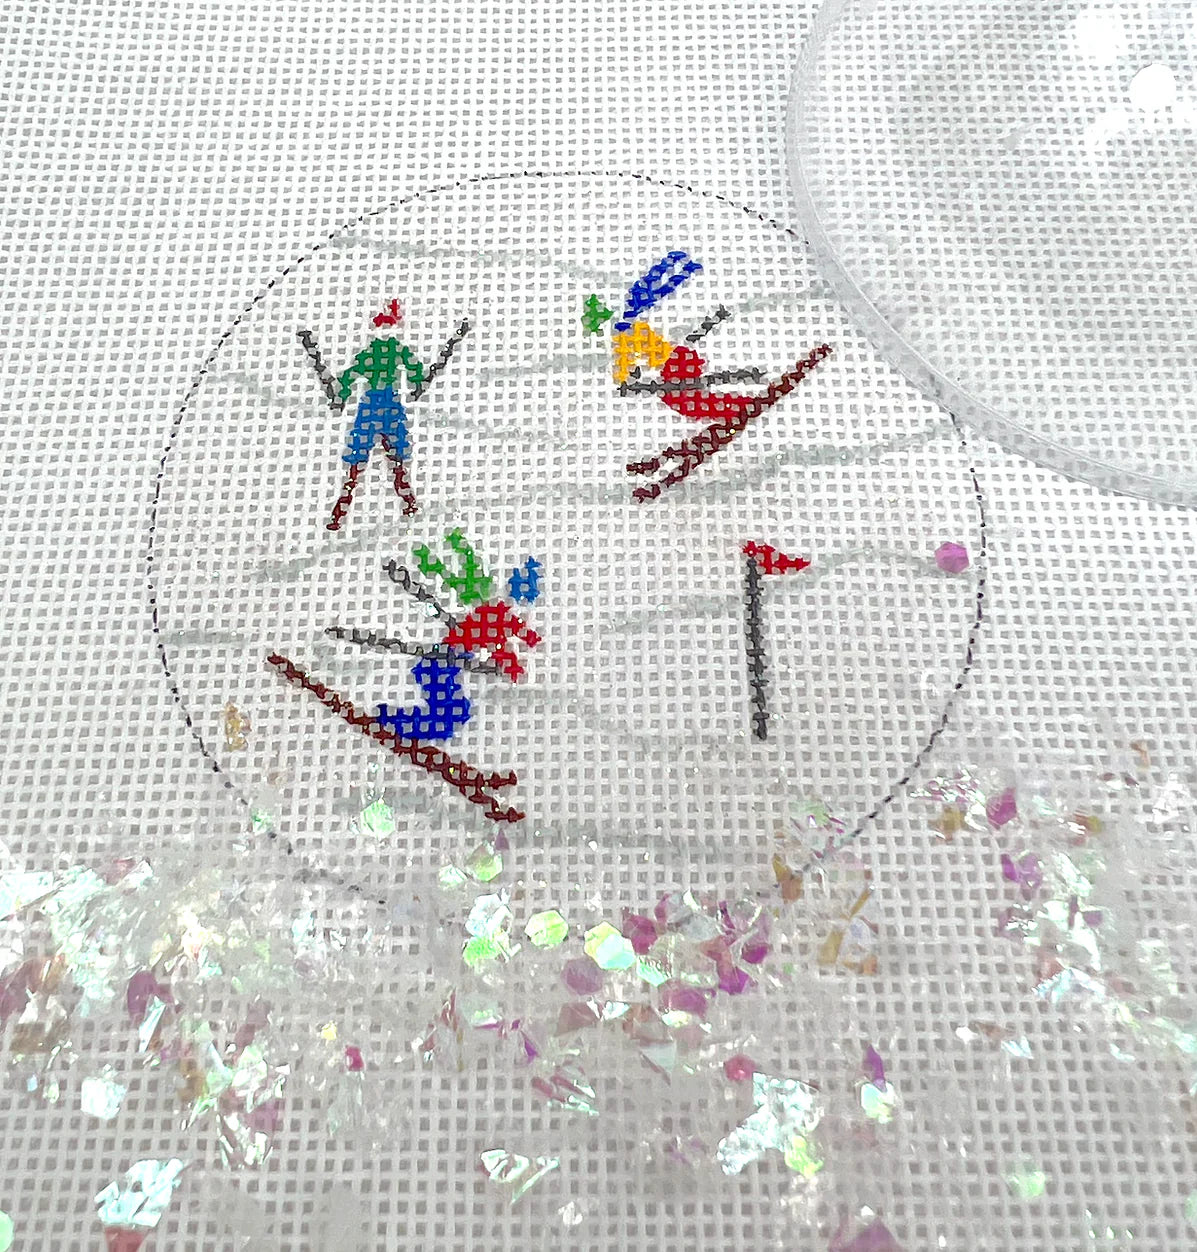 Downhill Skiers Snow globe - The Flying Needles